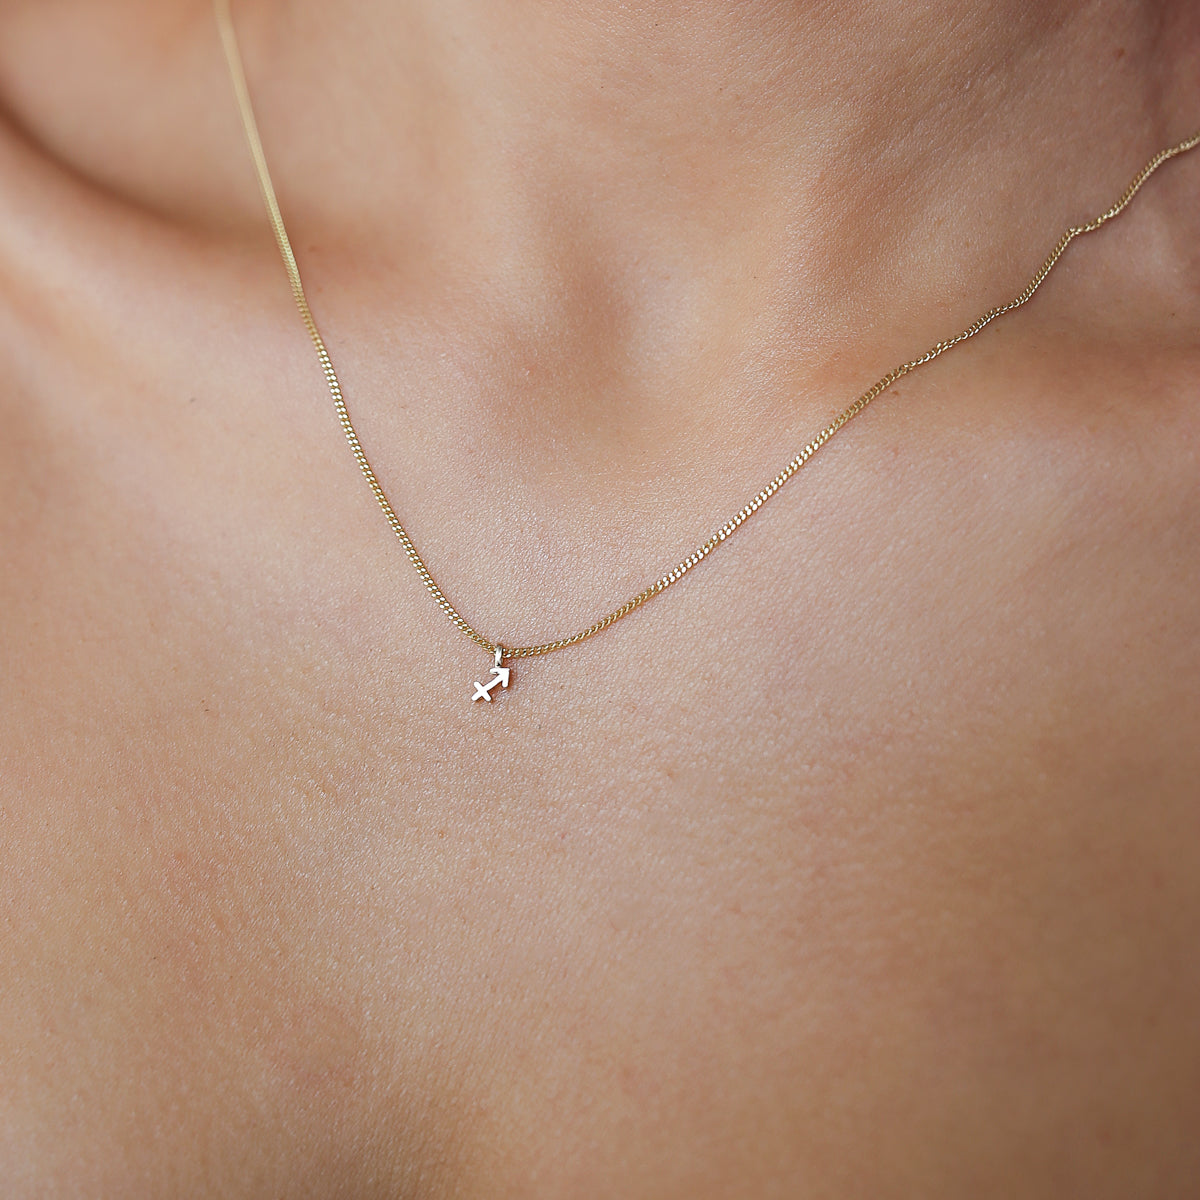 Solid gold and silver jewellery: Our newest addition, our 9ct Yellow Gold Tiny Zodiac Necklace on a 45cm diamond curb chain